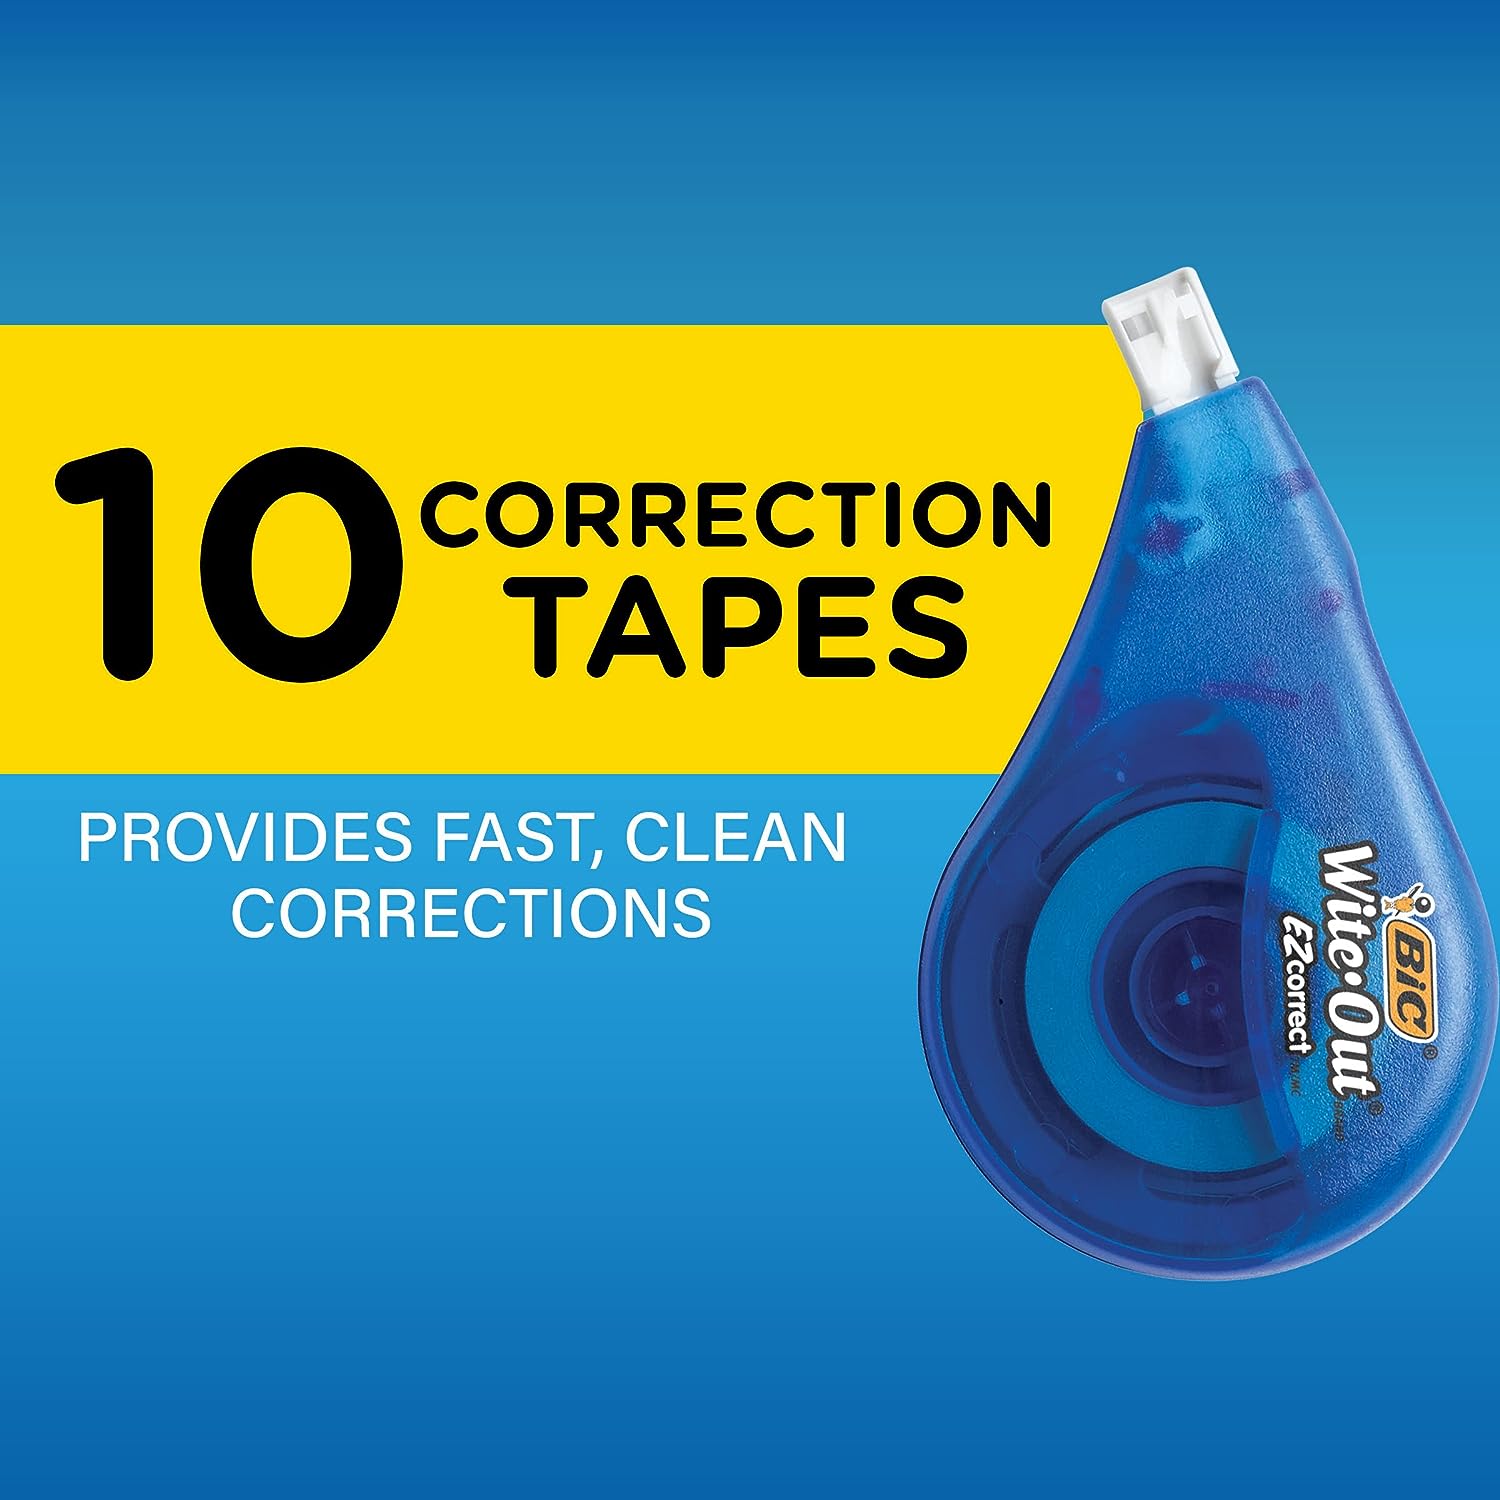 BIC Wite-Out Brand EZ Correct Correction Tape, 39.3 Feet, 10-Count Pack of white Correction Tape